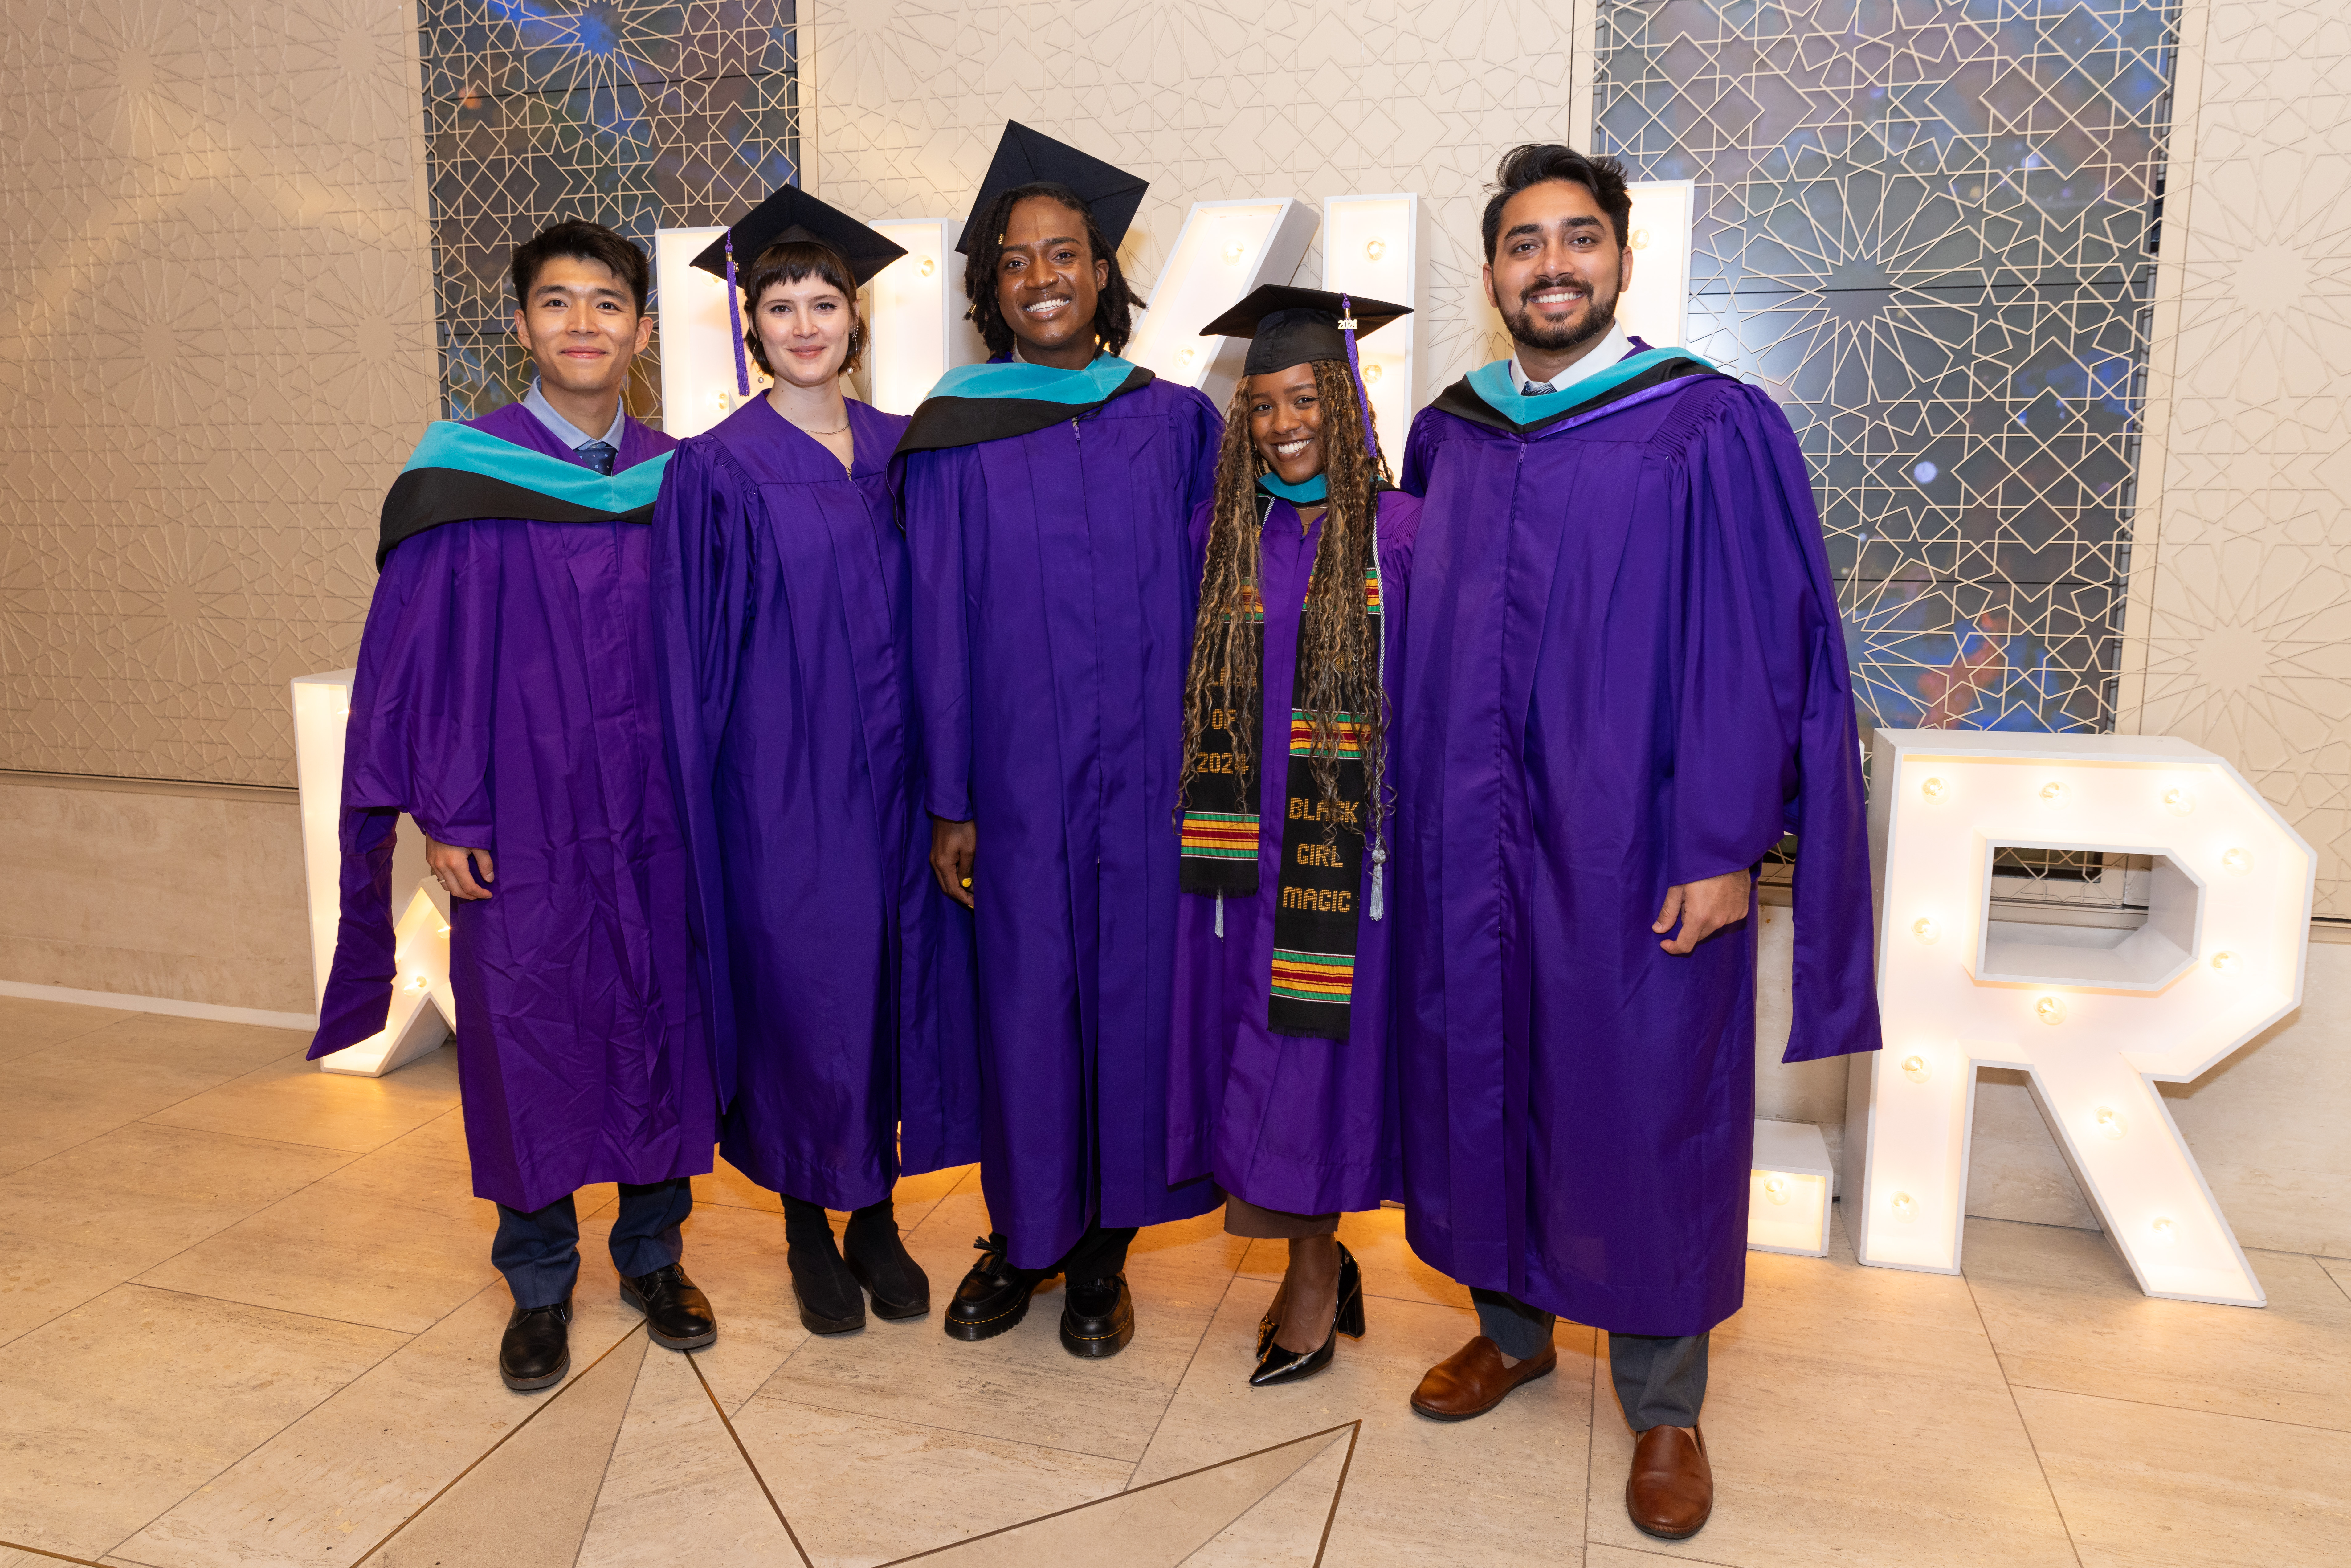 group of students in purple graduation regalia posing for photo